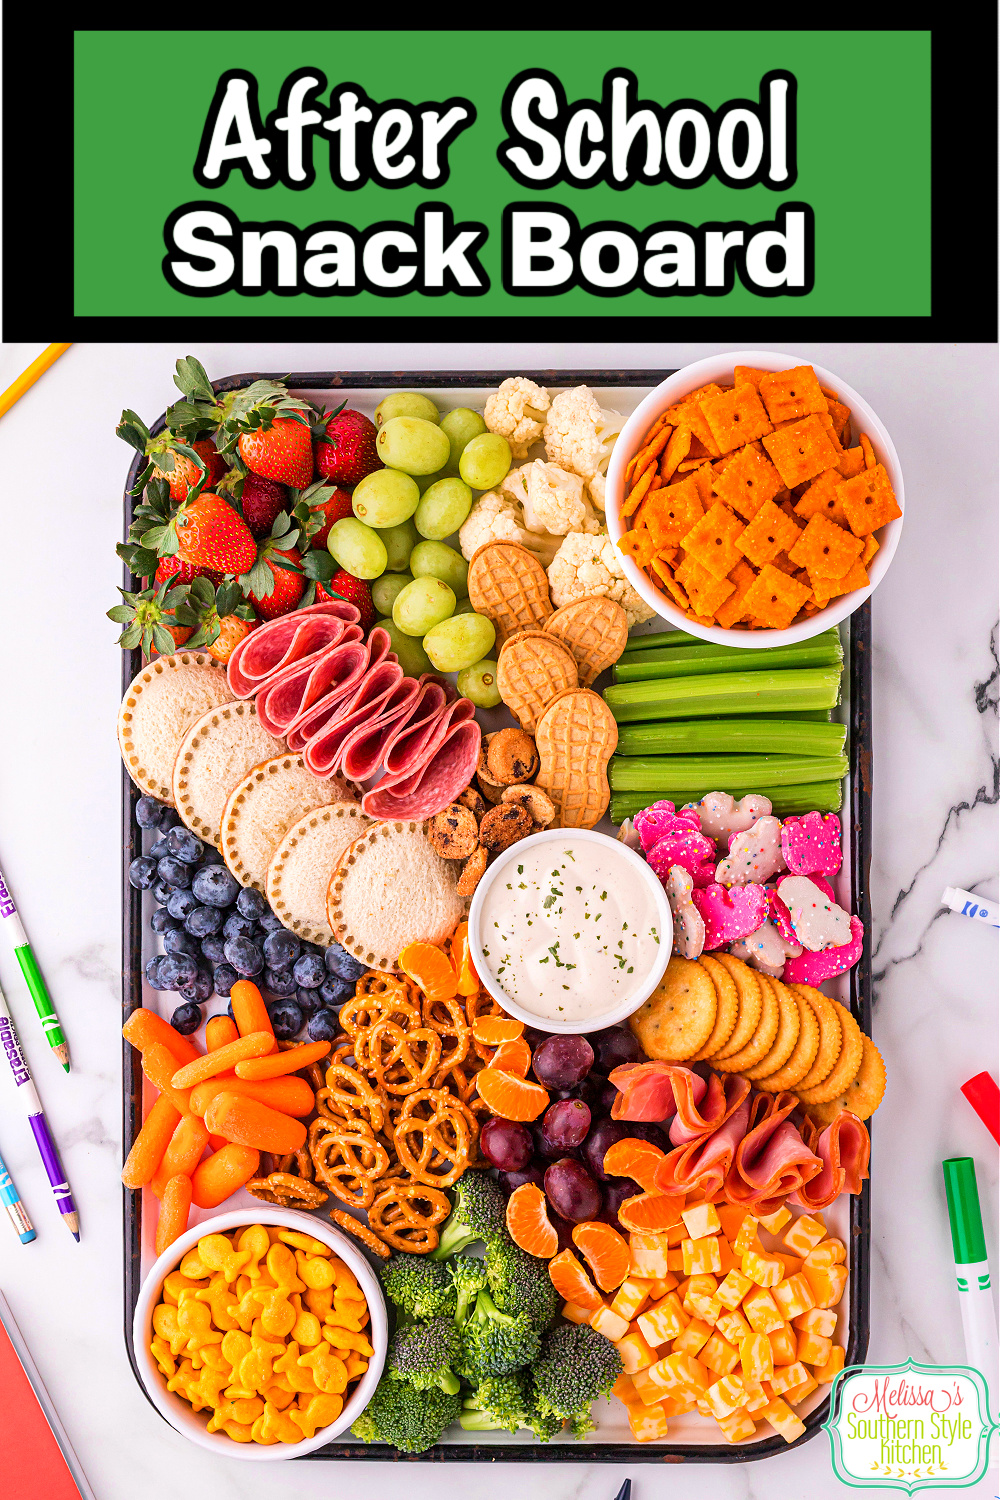 Looking for a way to get the kids to eat more fruits and vegetables? Create an After School Snack Board filled with all the good snacks! #snackboard #afterschoolsnacks #easysnackrecipes #uncrustables #easyrecipes #charcuterieideas #snacks #PB&Jsandwiches #ranchdip #charcuterie